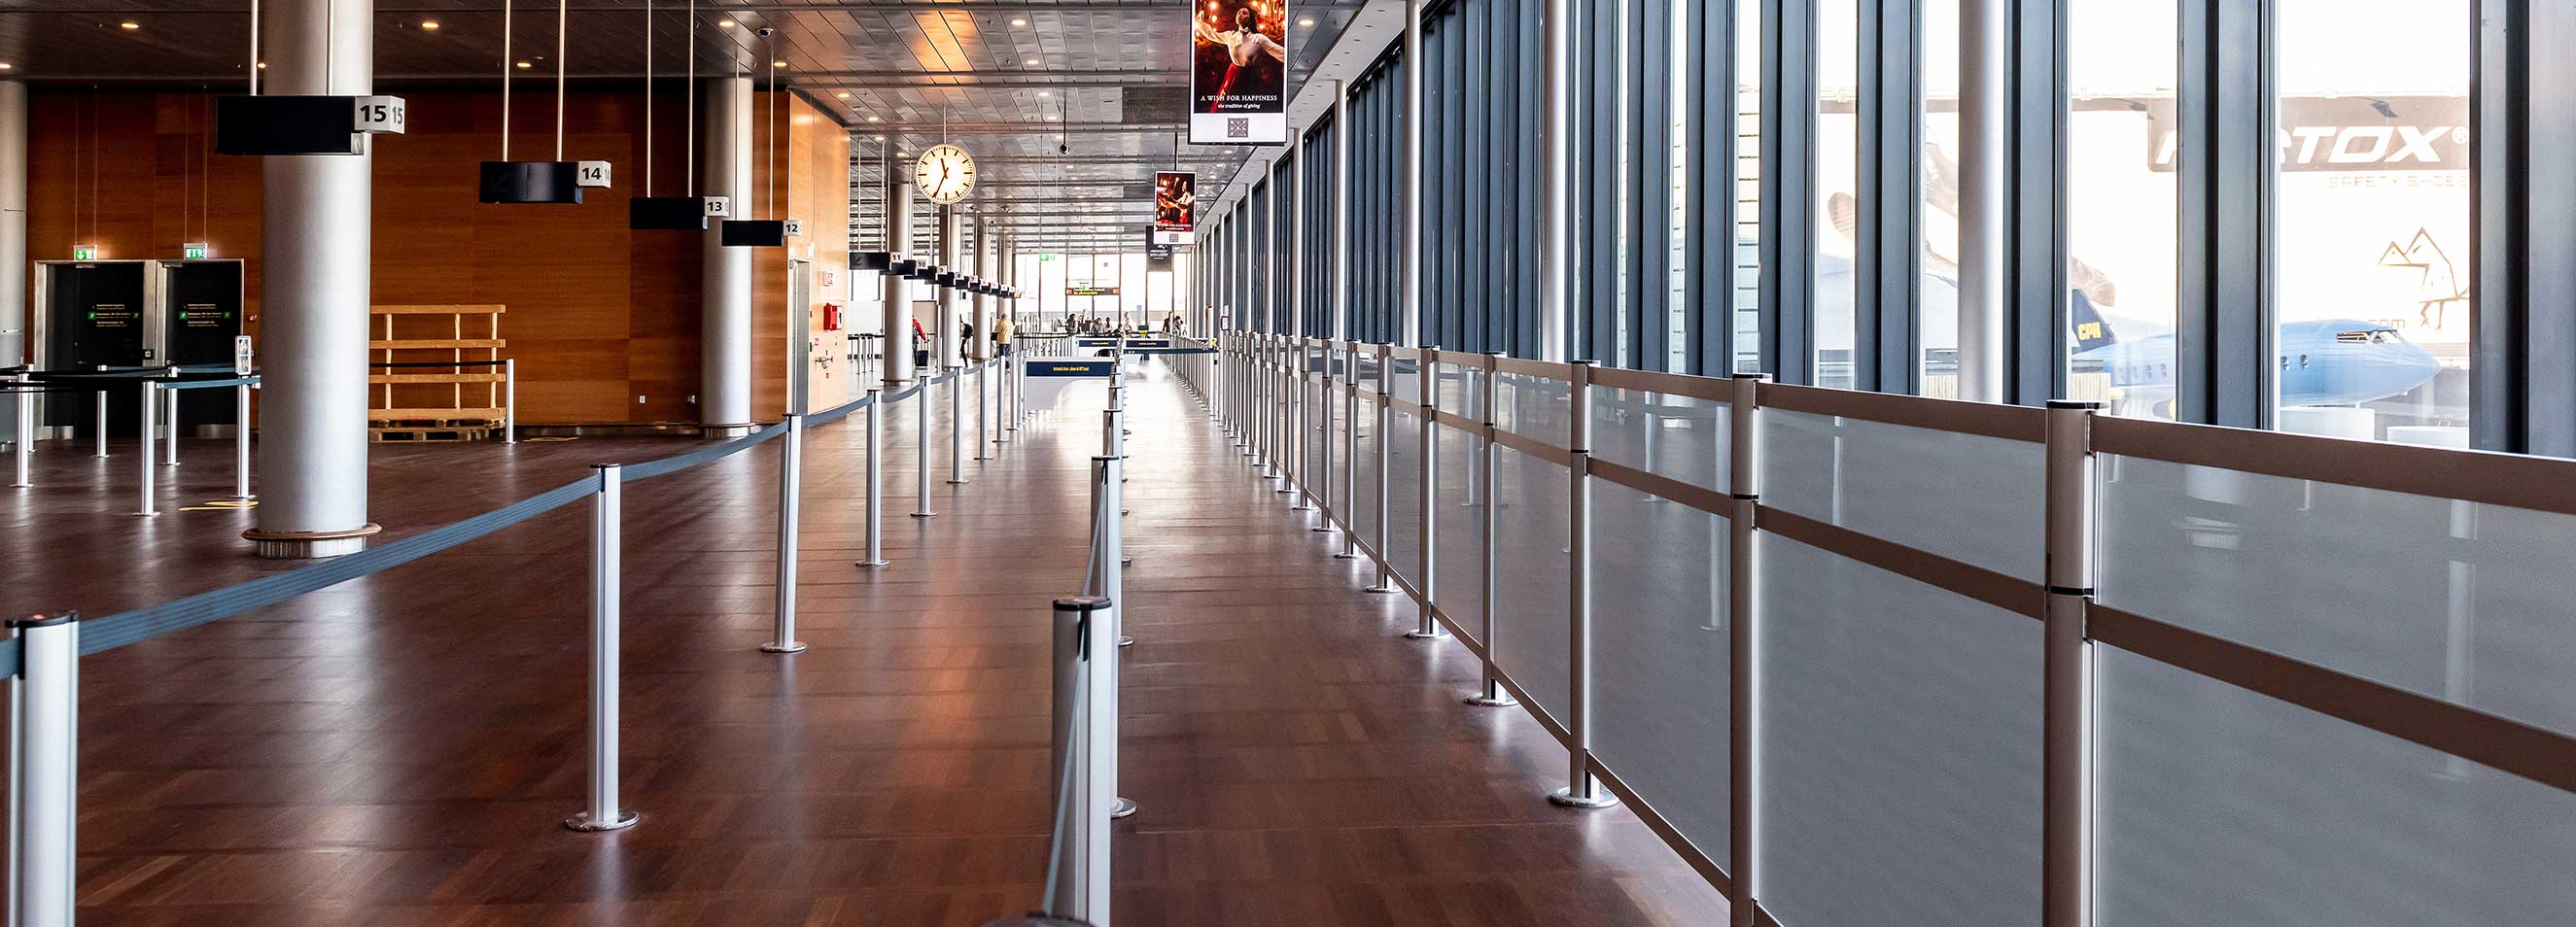 Partition wall systems in the entrance of an airport